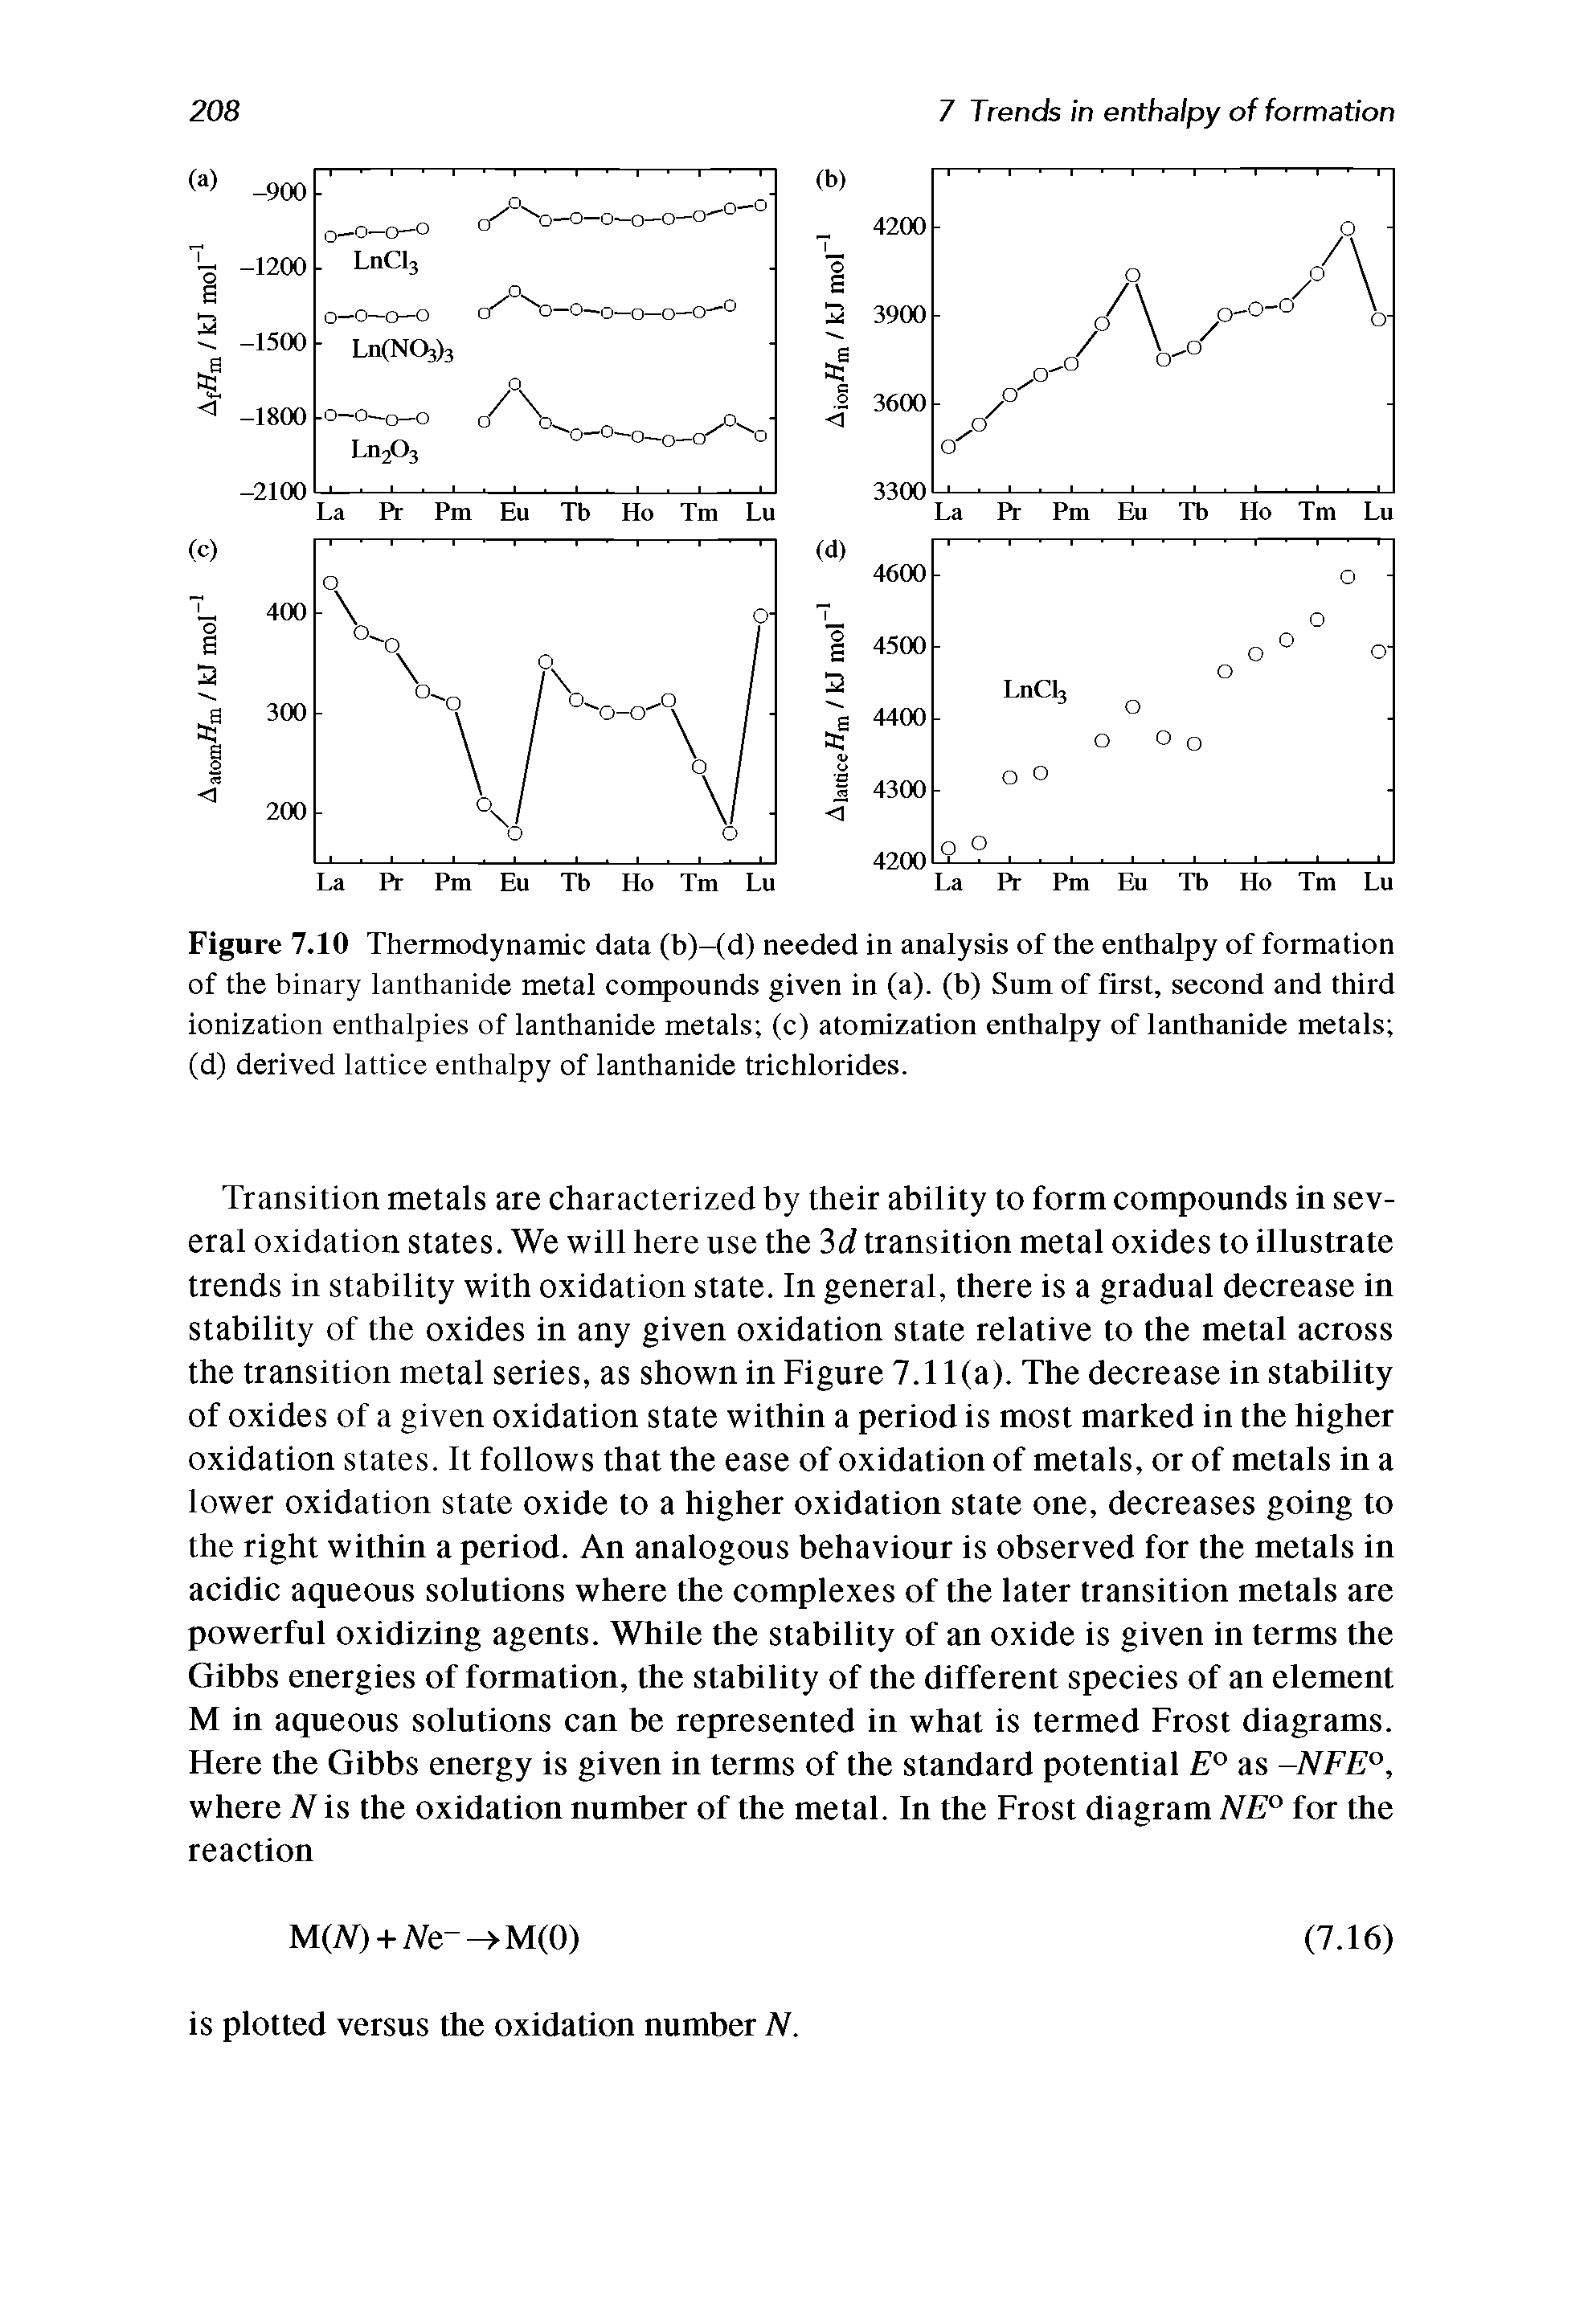 Figure 7.10 Thermodynamic data (b)-(d) needed in analysis of the enthalpy of formation of the binary lanthanide metal compounds given in (a), (b) Sum of first, second and third ionization enthalpies of lanthanide metals (c) atomization enthalpy of lanthanide metals (d) derived lattice enthalpy of lanthanide trichlorides.